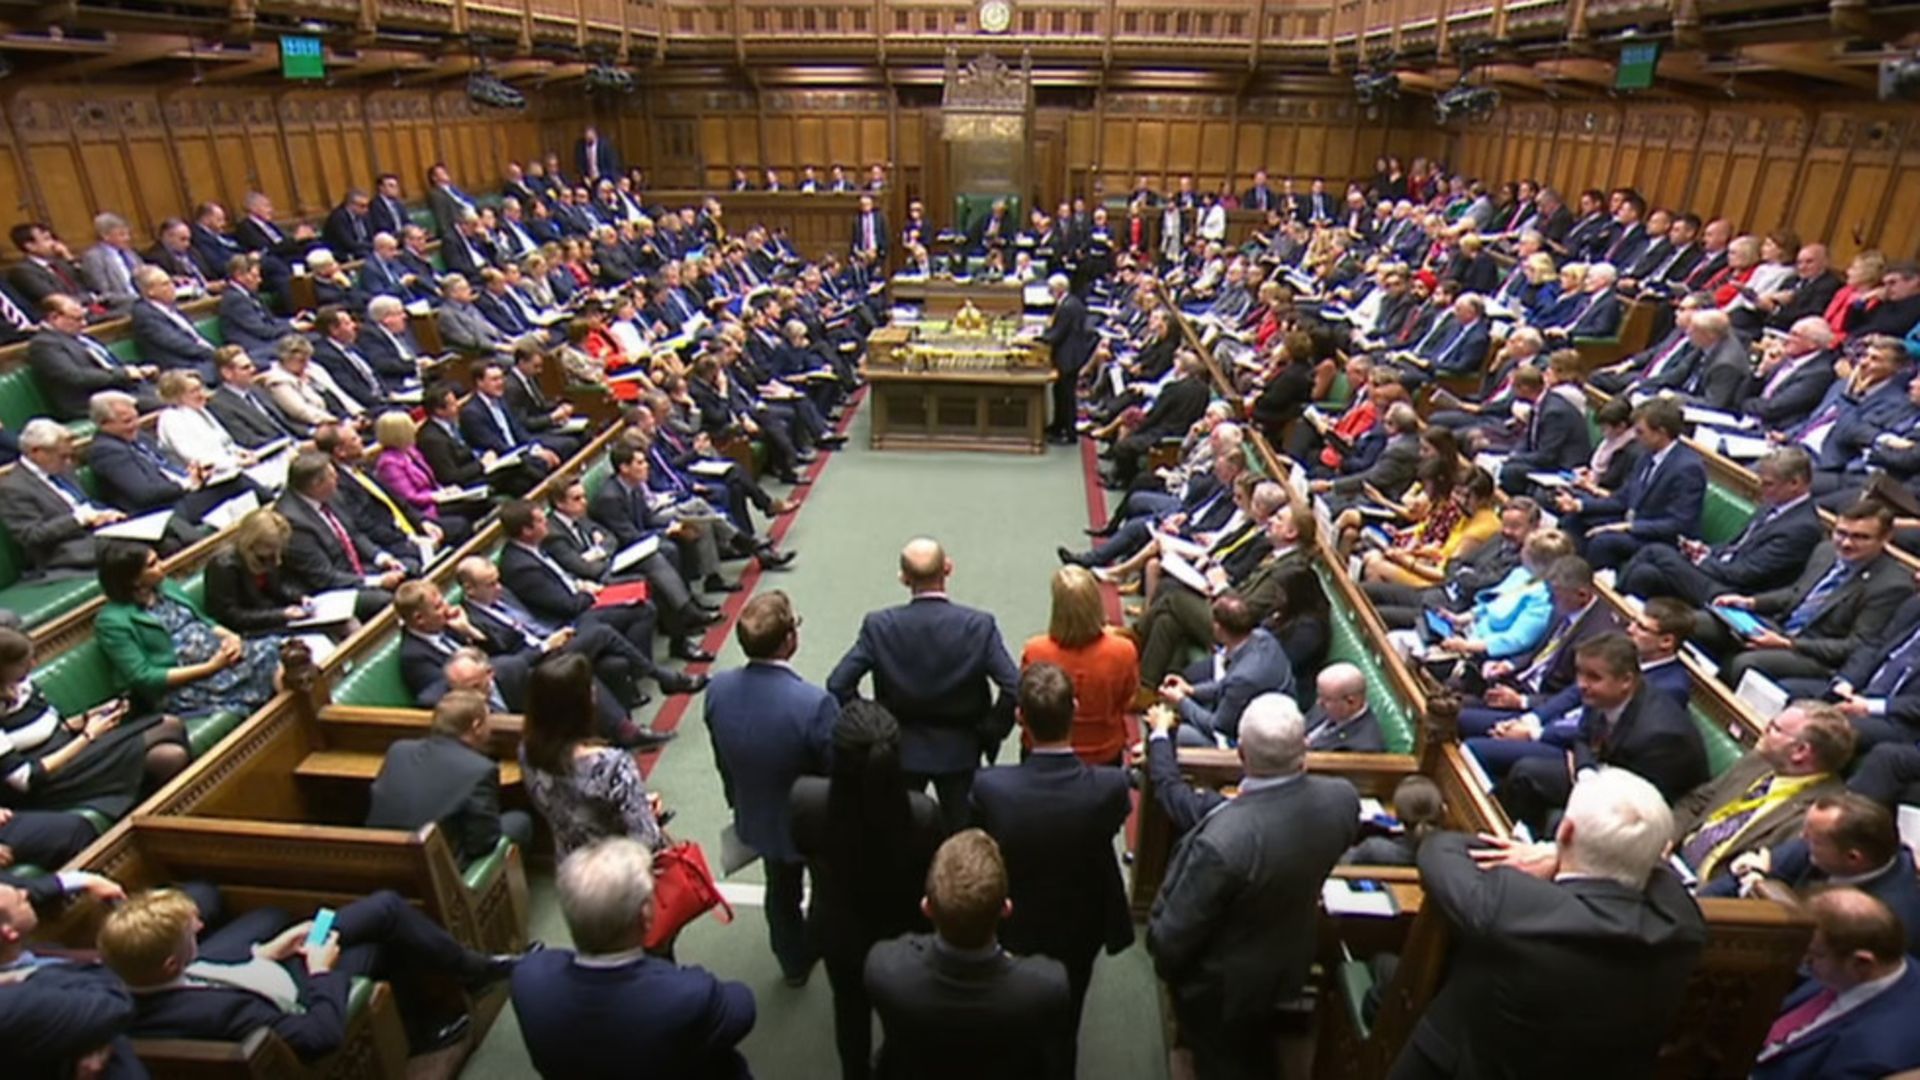 MPs in the House of Commons - Credit: House of Commons/PA Wire.